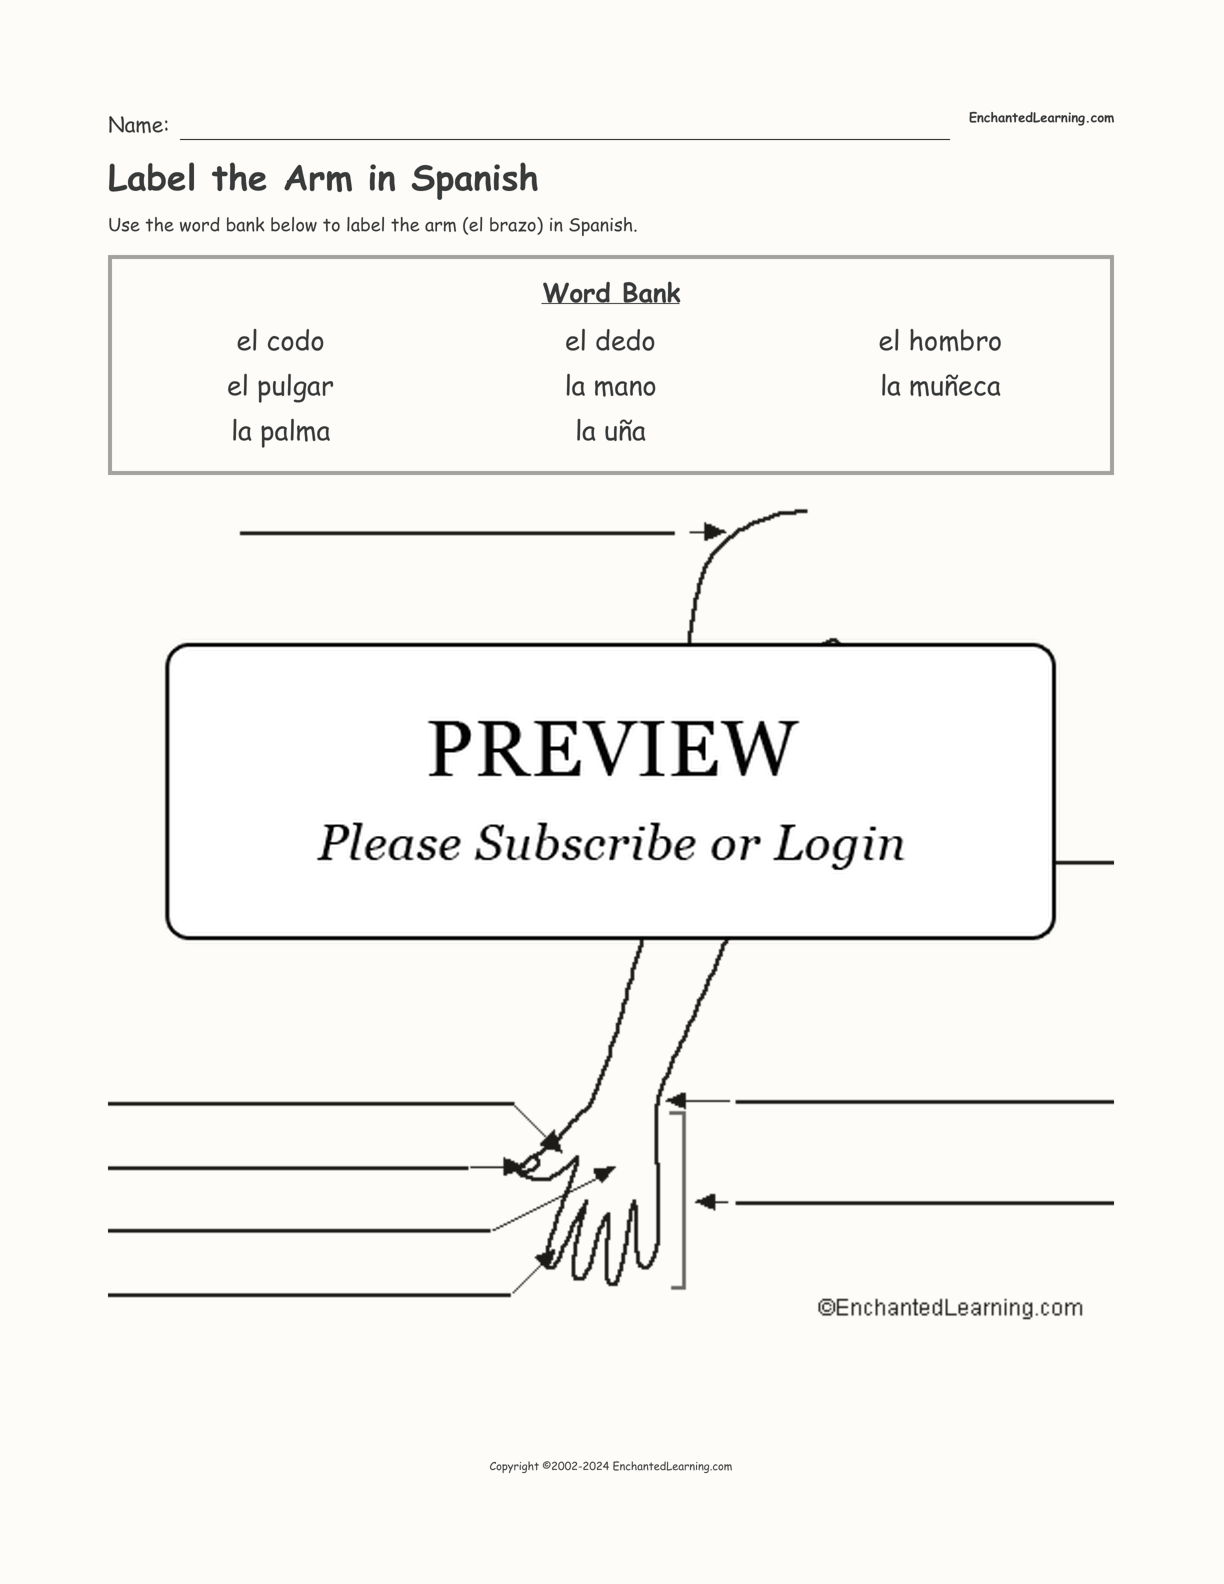 Label the Arm in Spanish interactive worksheet page 1